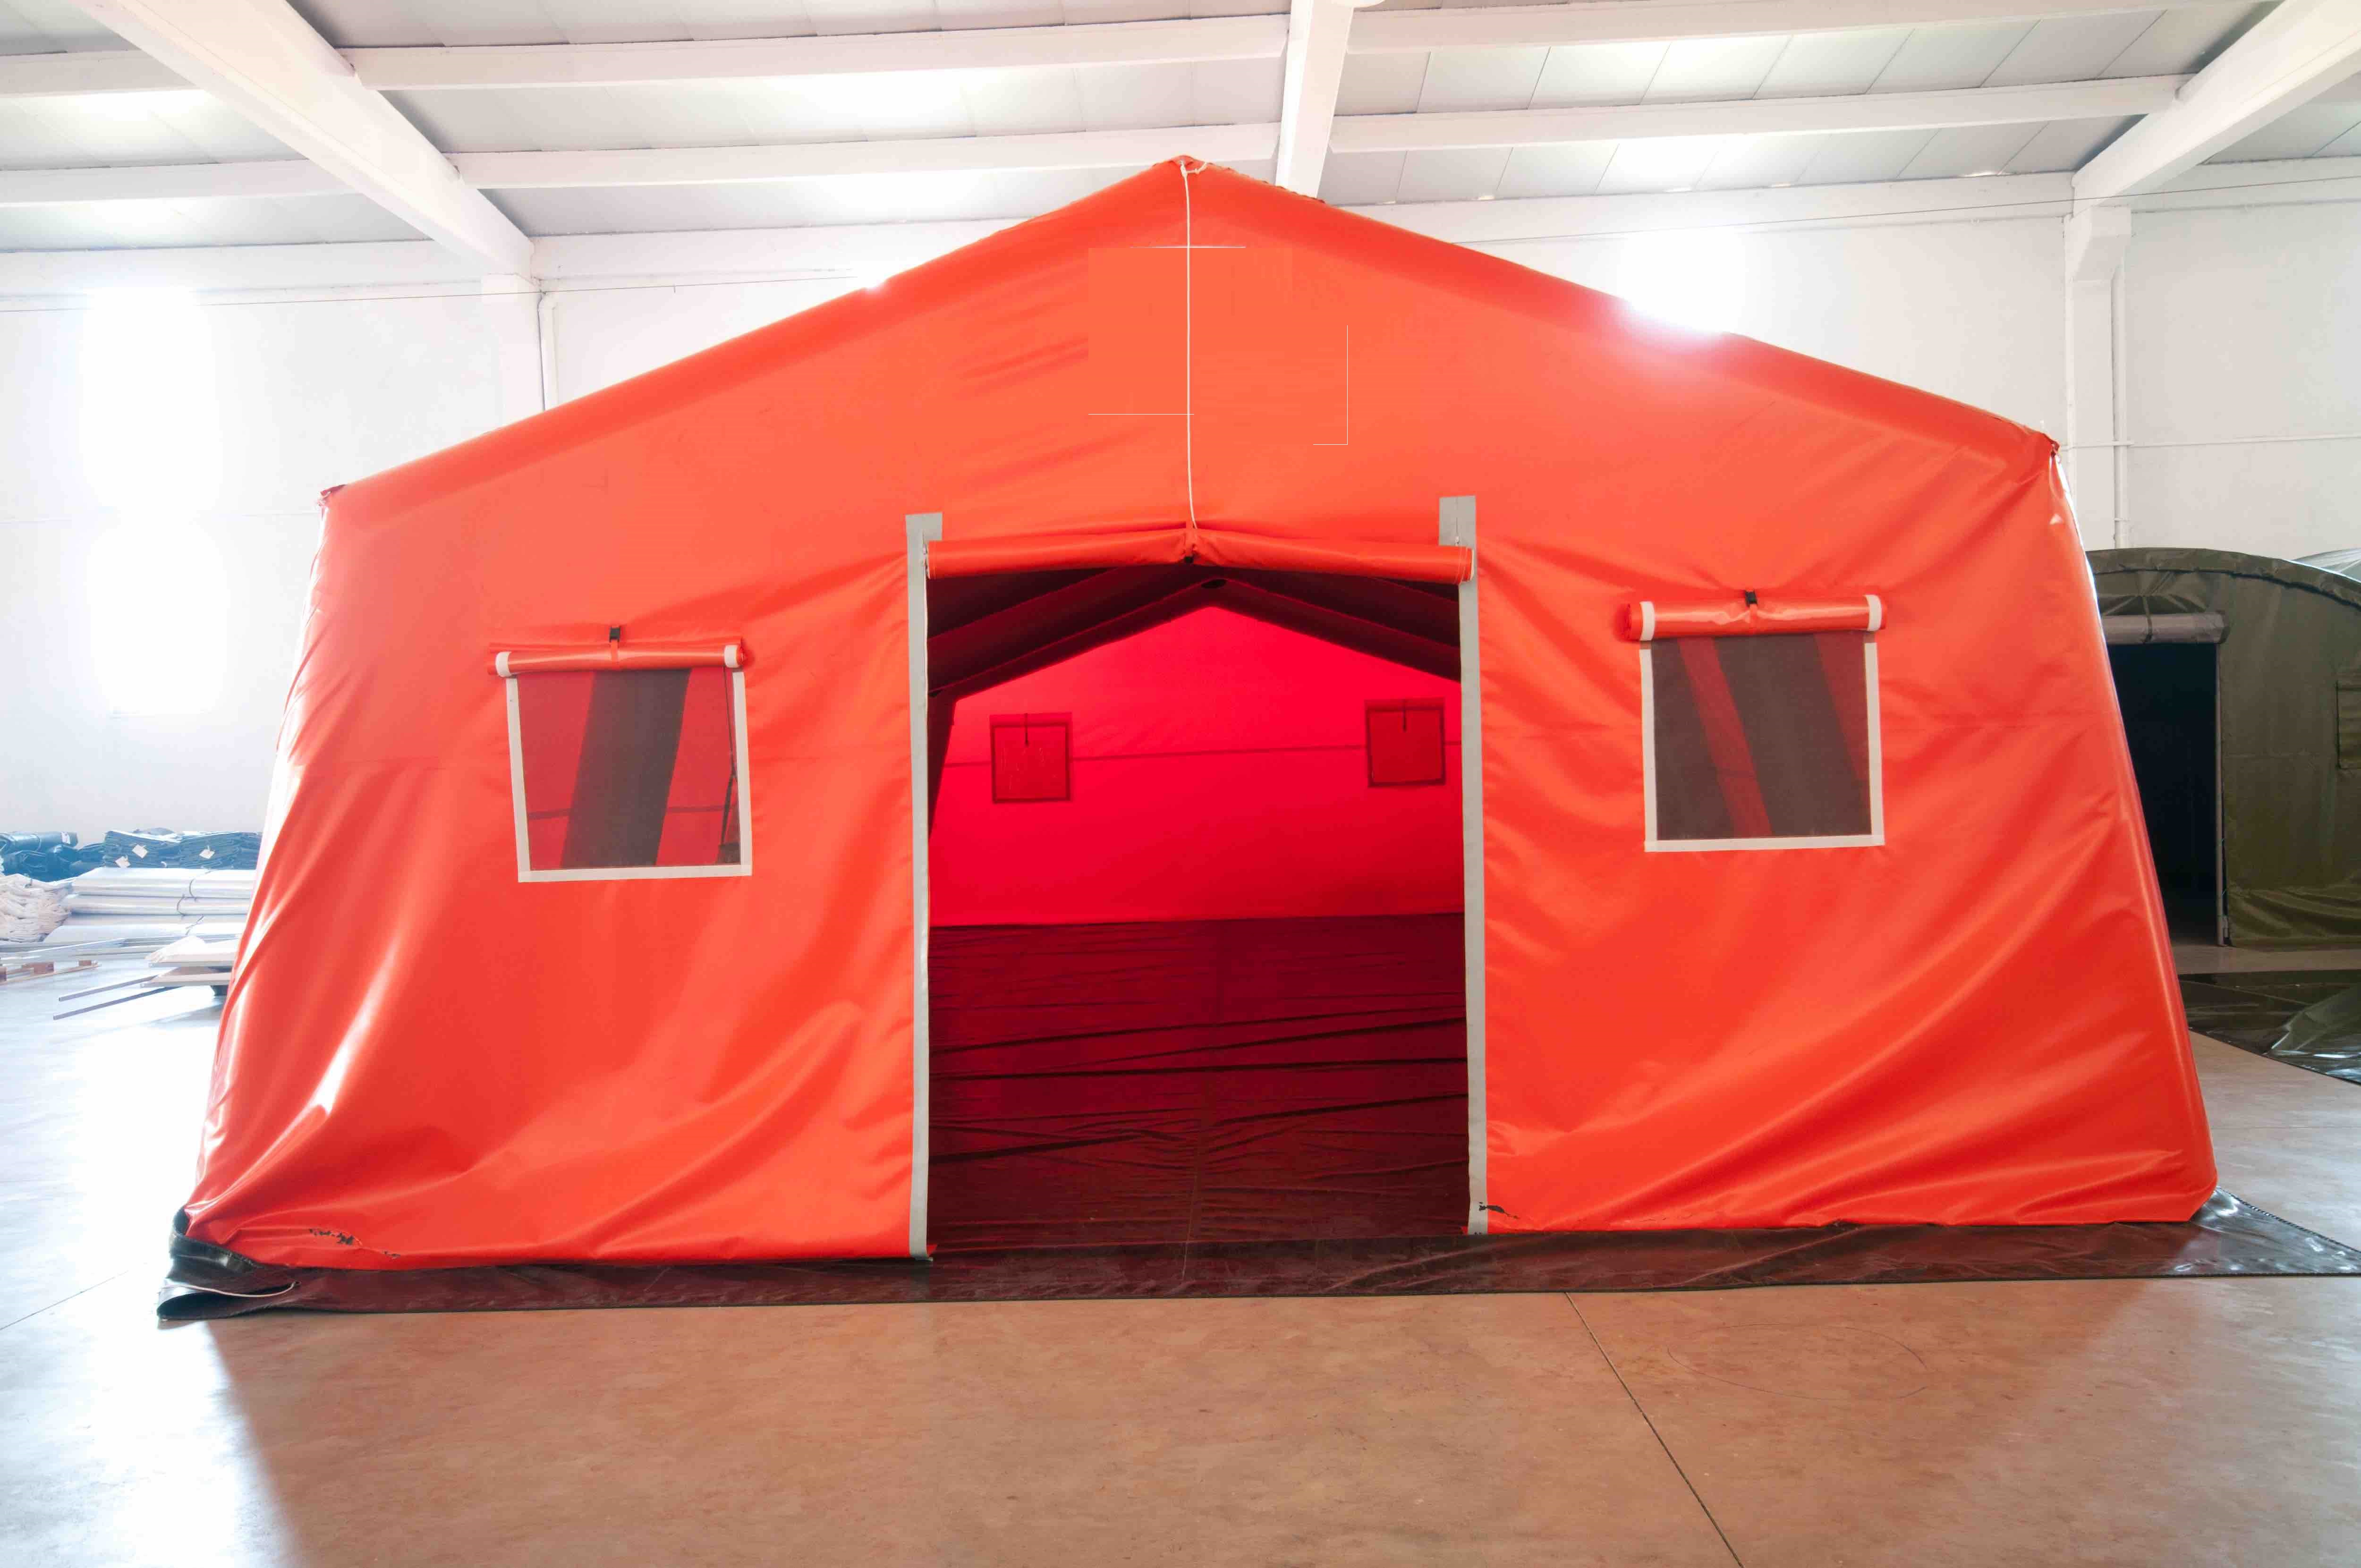 Medical and Emergency Tents For Covid19 Pandemic   